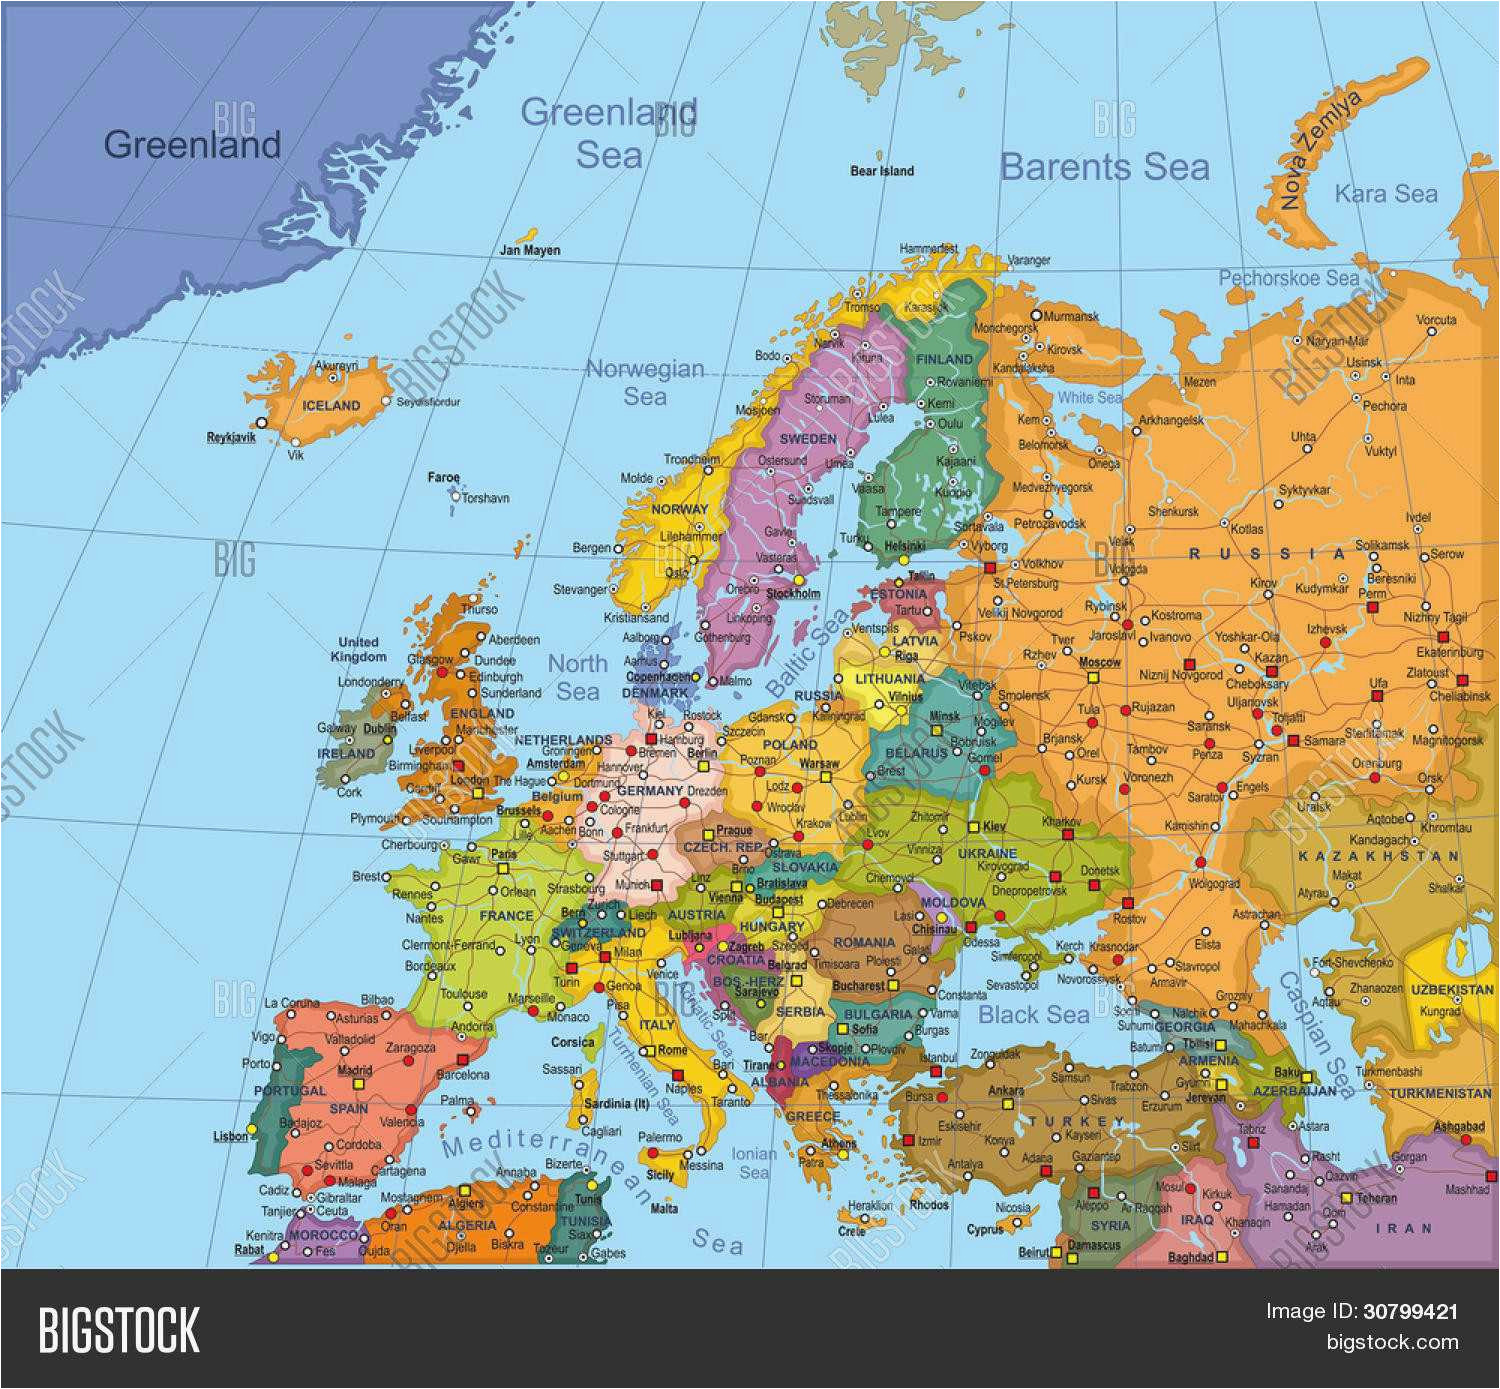 belgium map europe awesome lovely interactive map europe